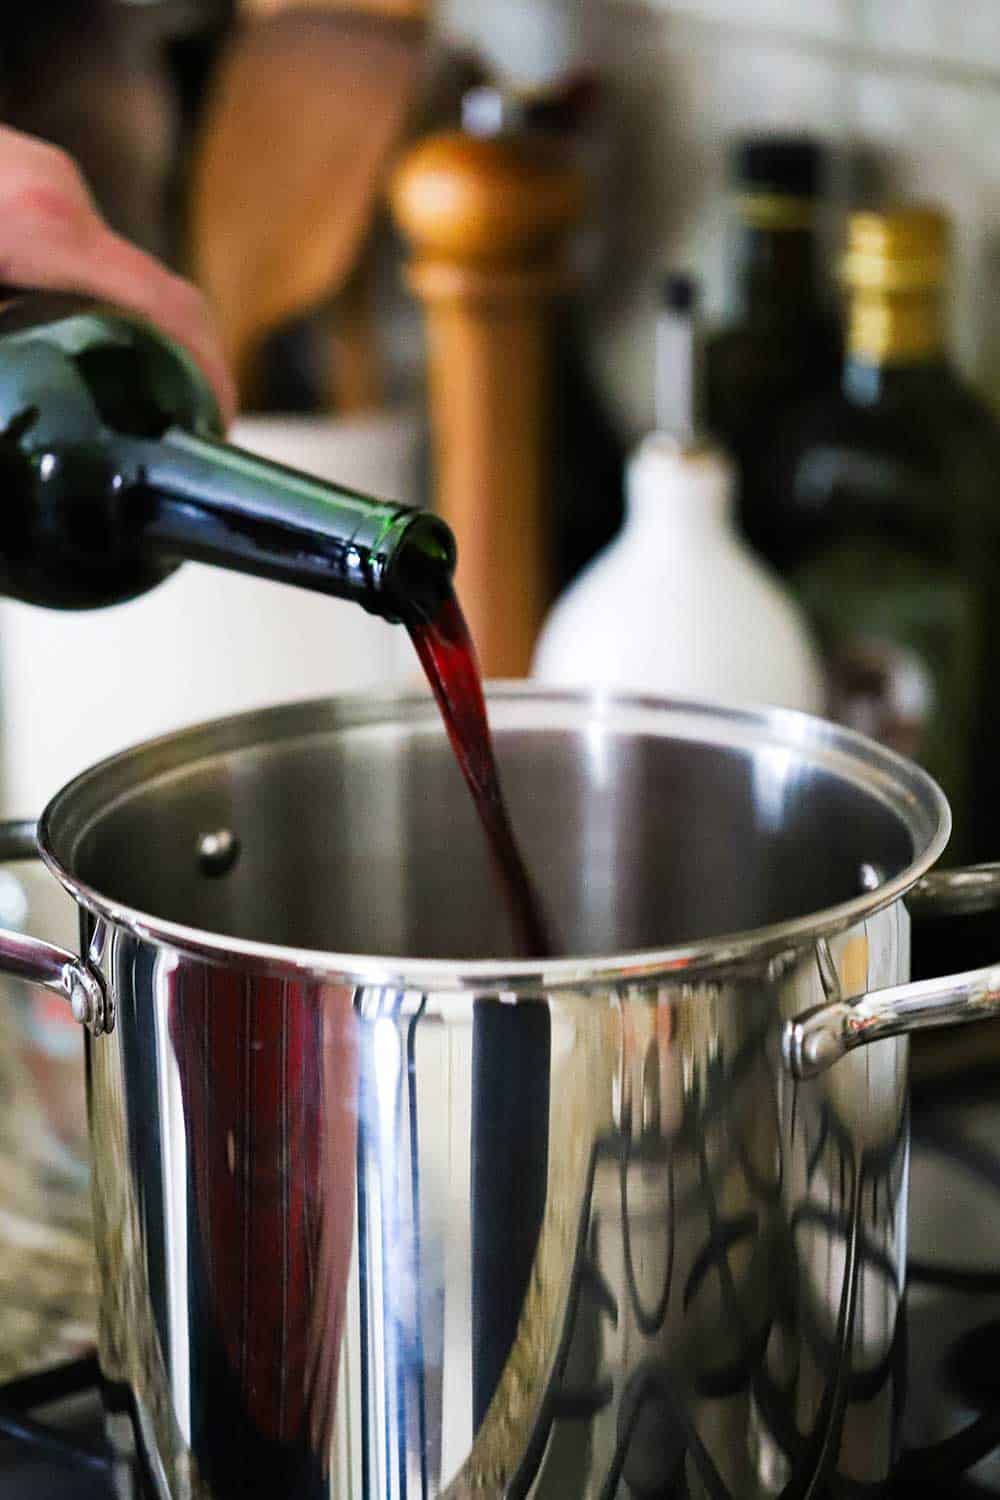 A hand pouring red wine from a bottle into a large silver pot on the stove.